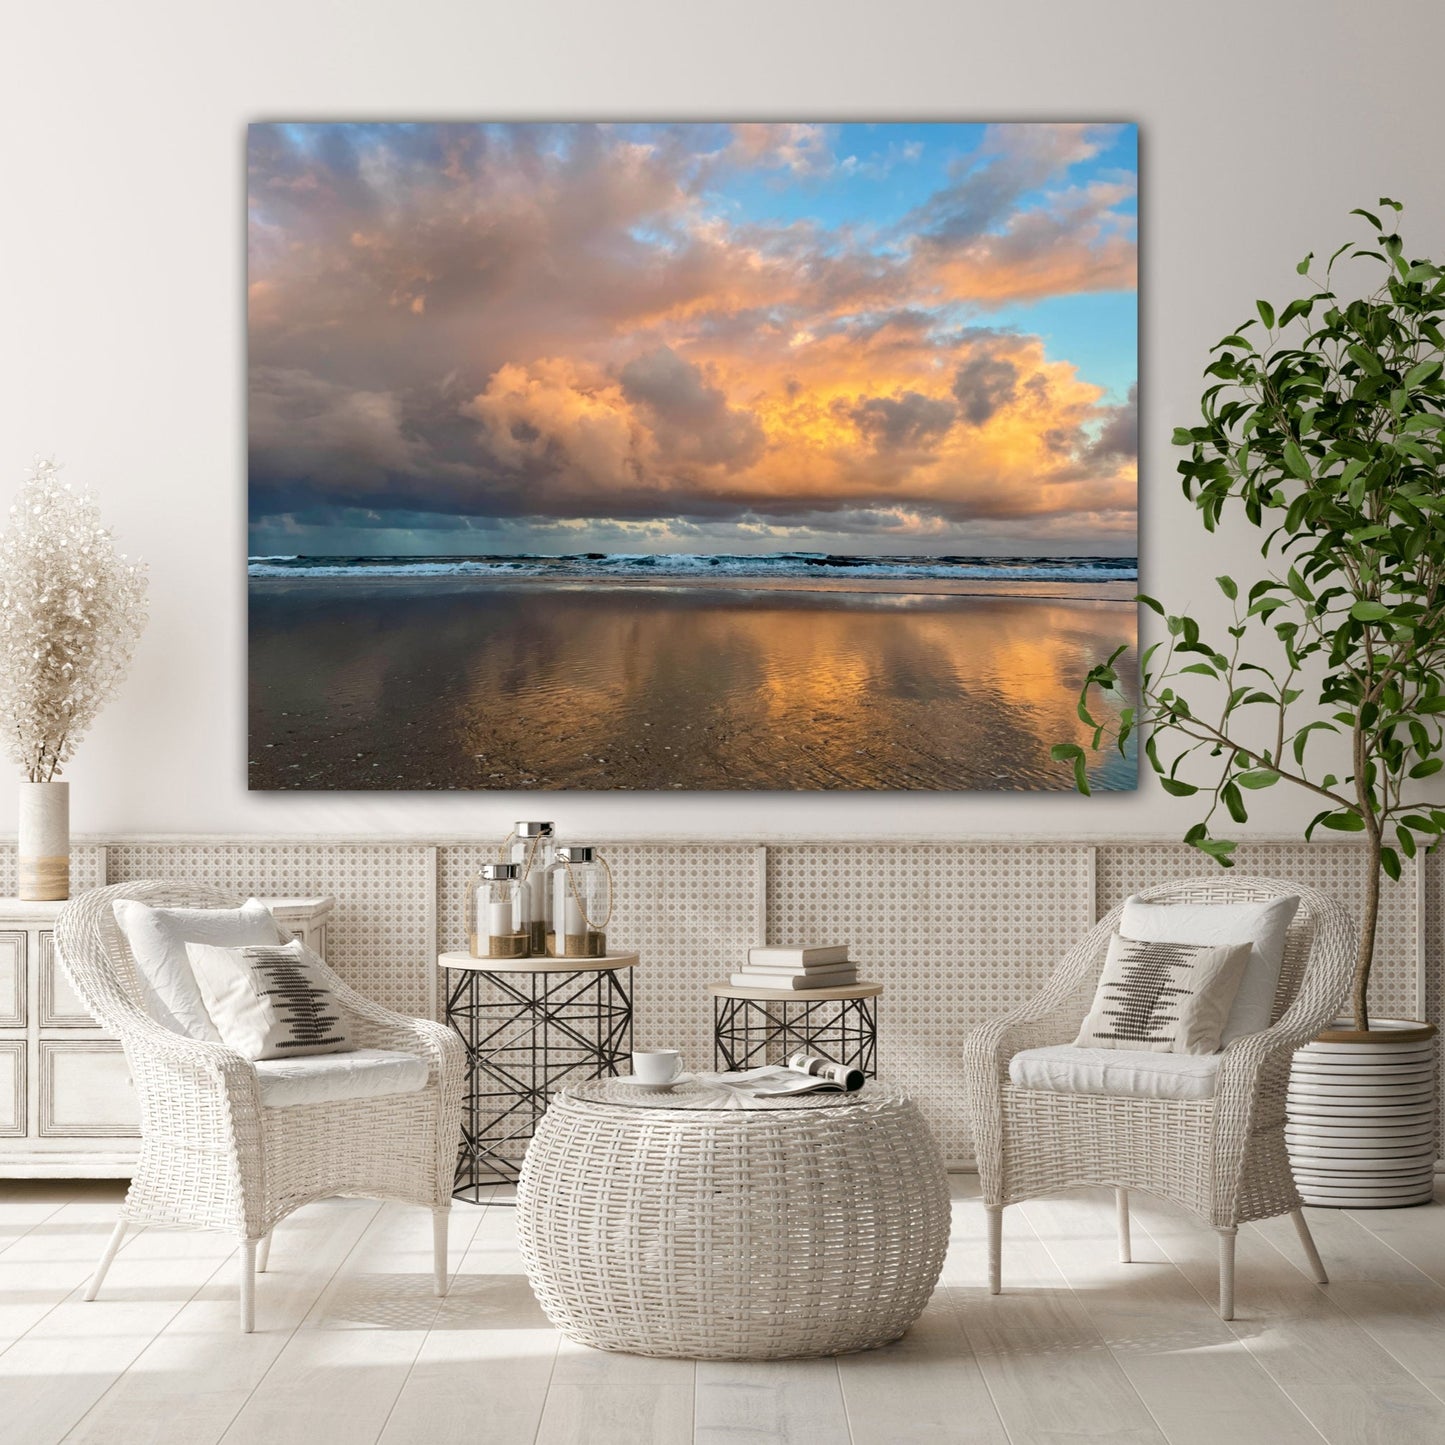 Florida Beach Sunset home decor by Jacqueline MB Designs 